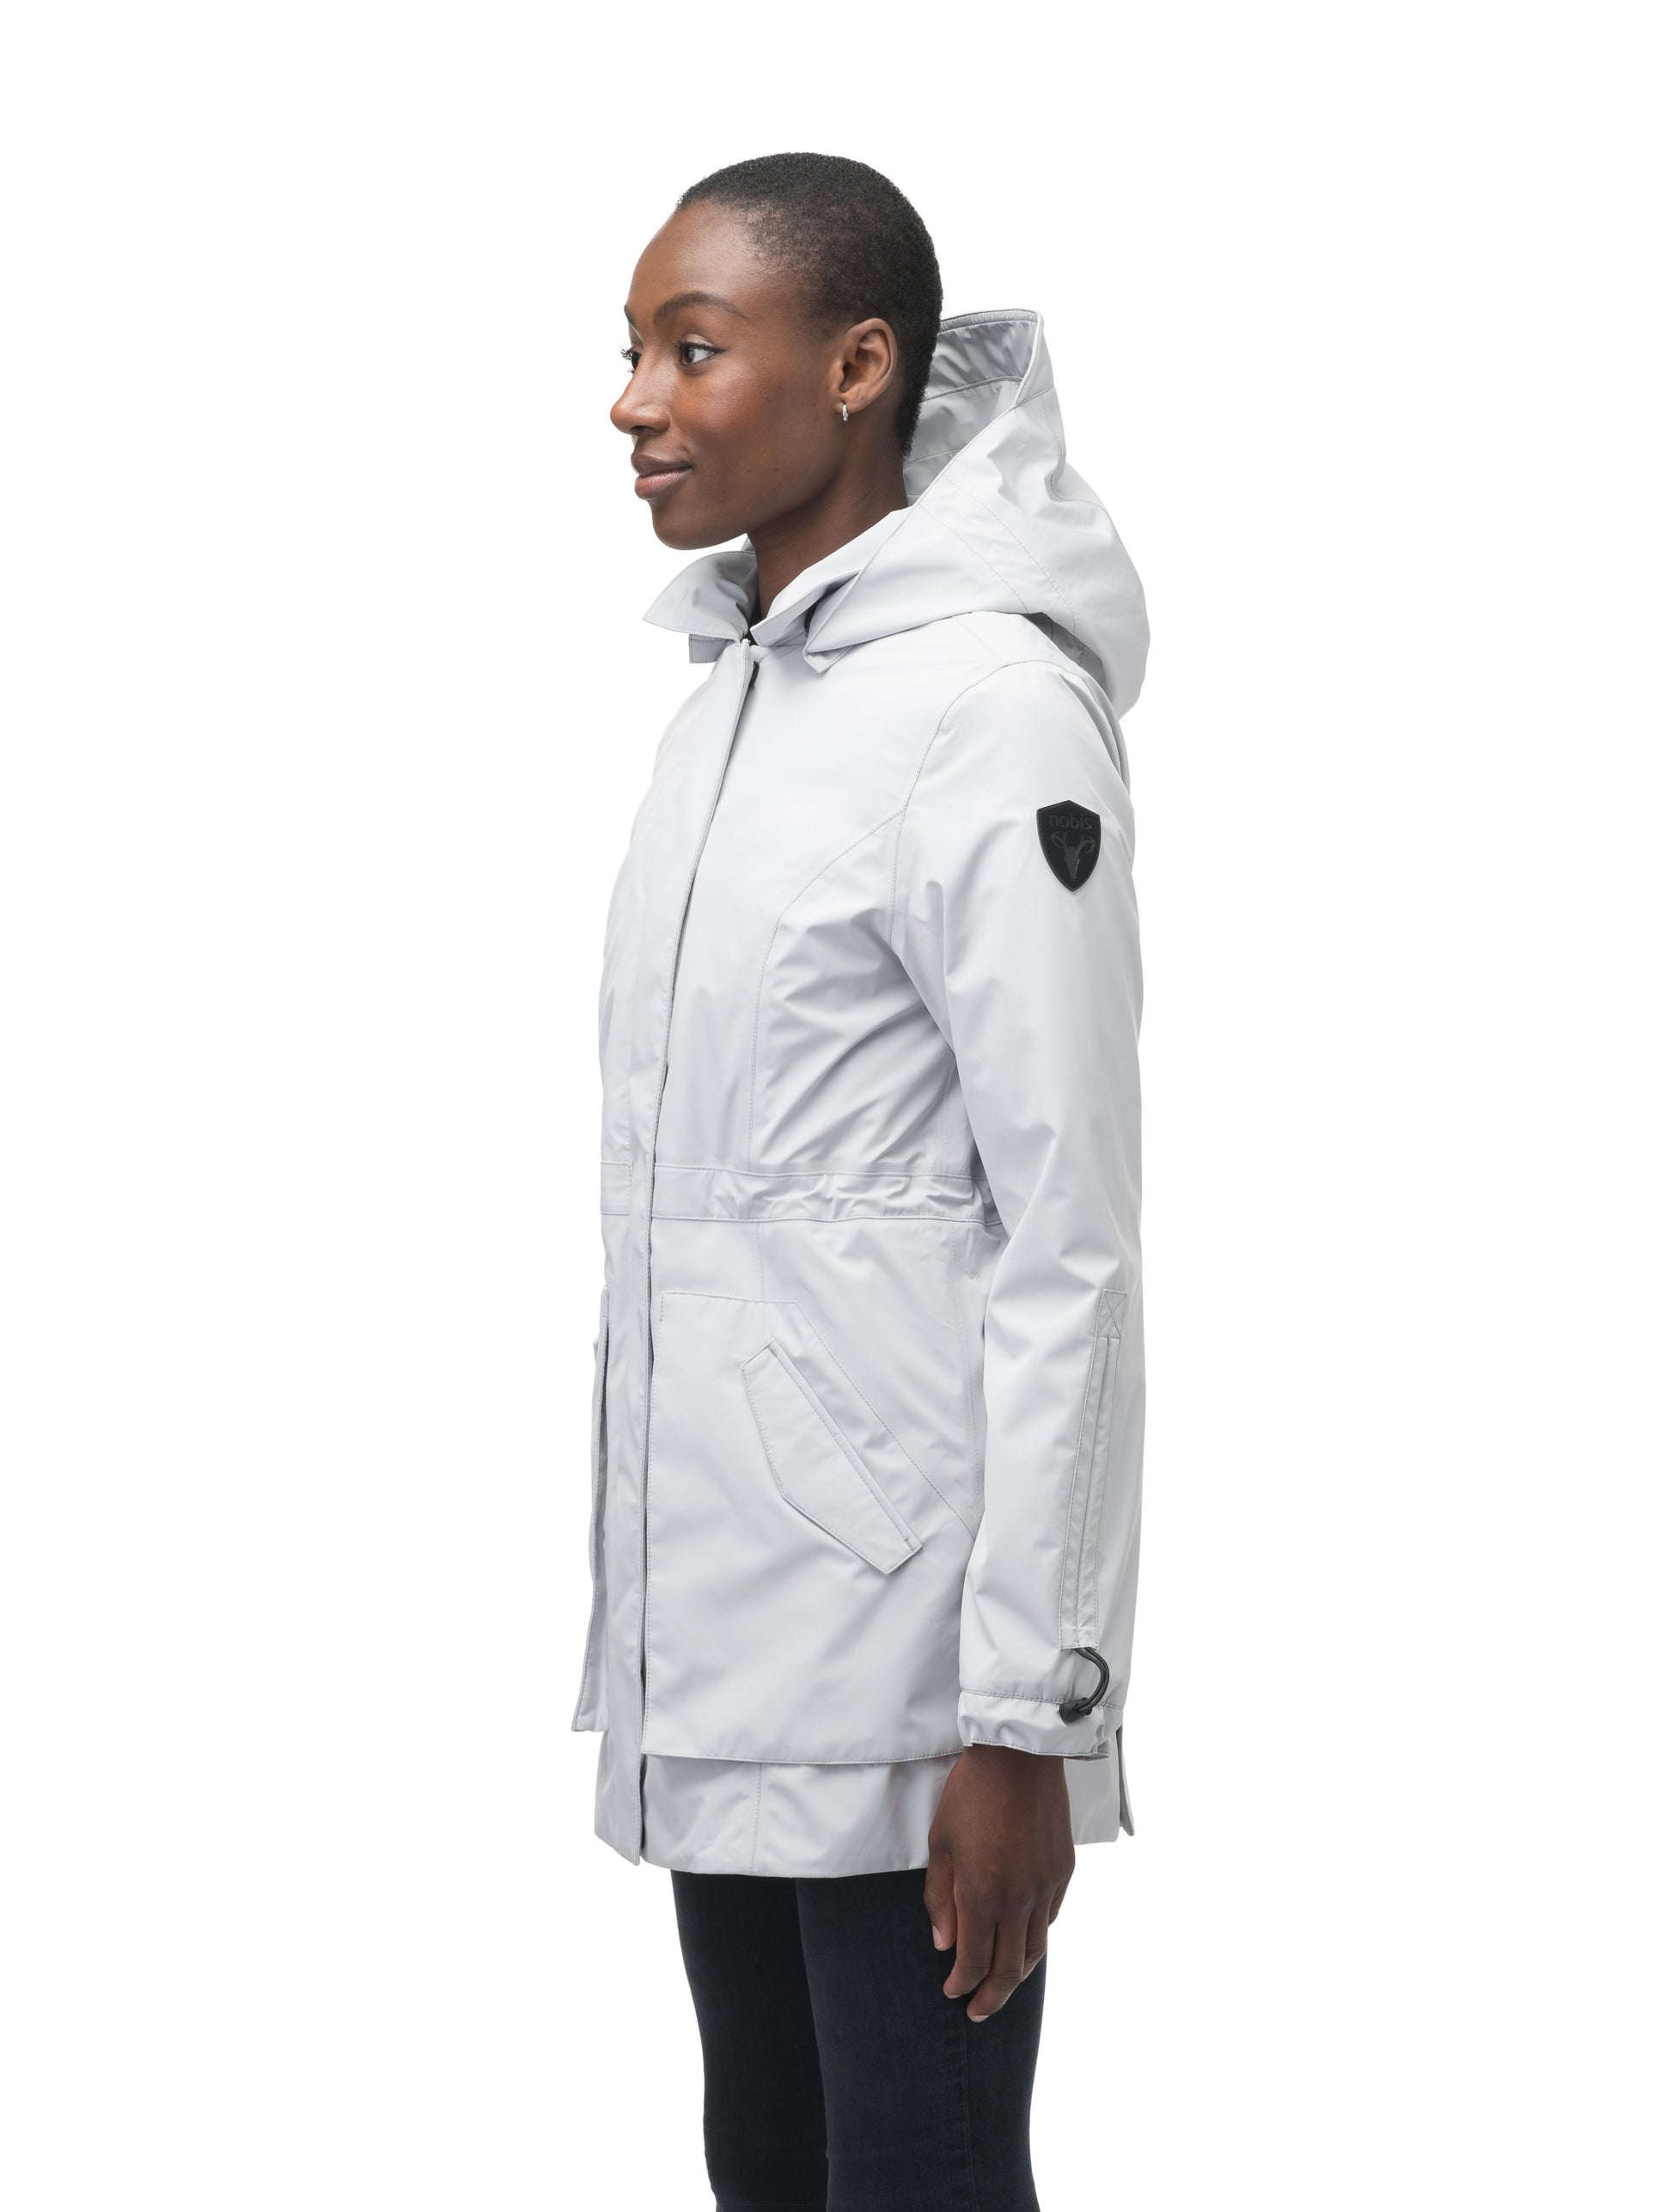 Women's thigh length raincoat with collar and non-removable hood in Light Grey